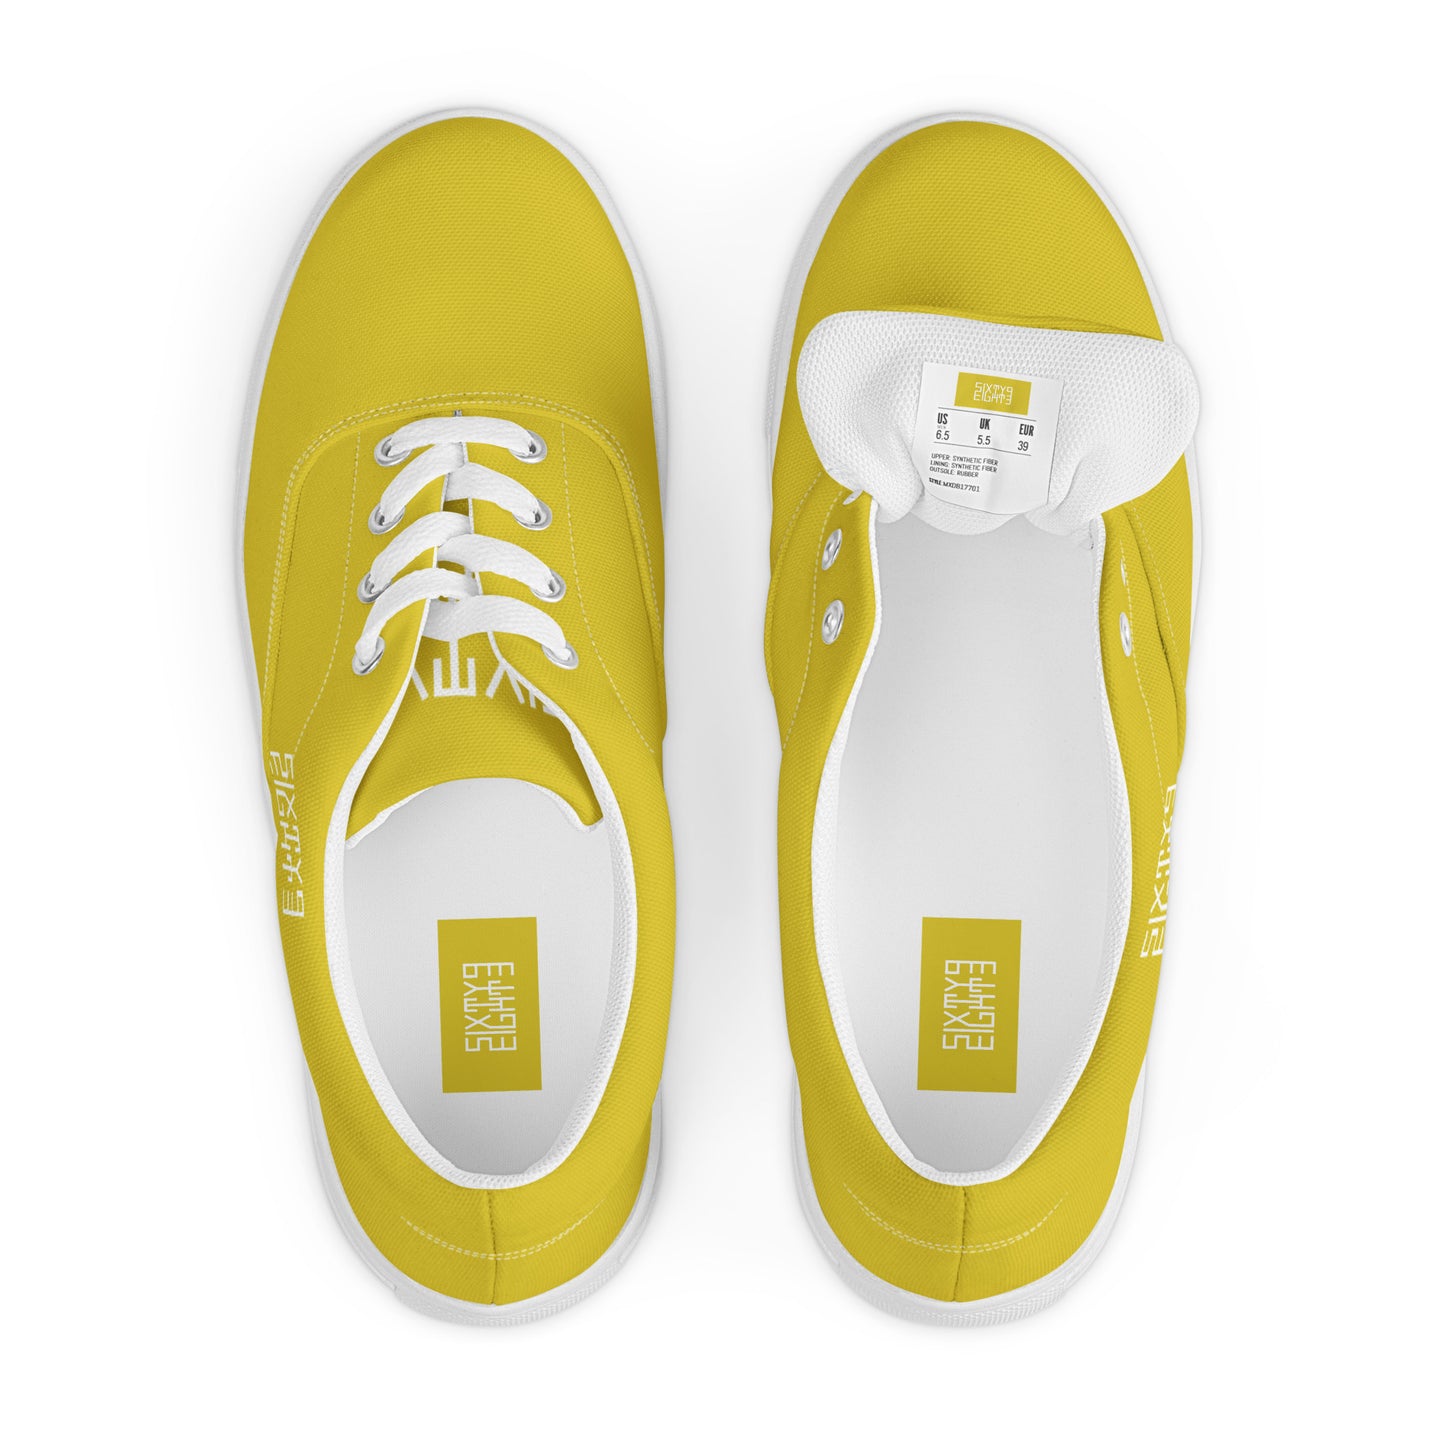 Sixty Eight 93 Logo White & Gold Women's Low Top Shoes